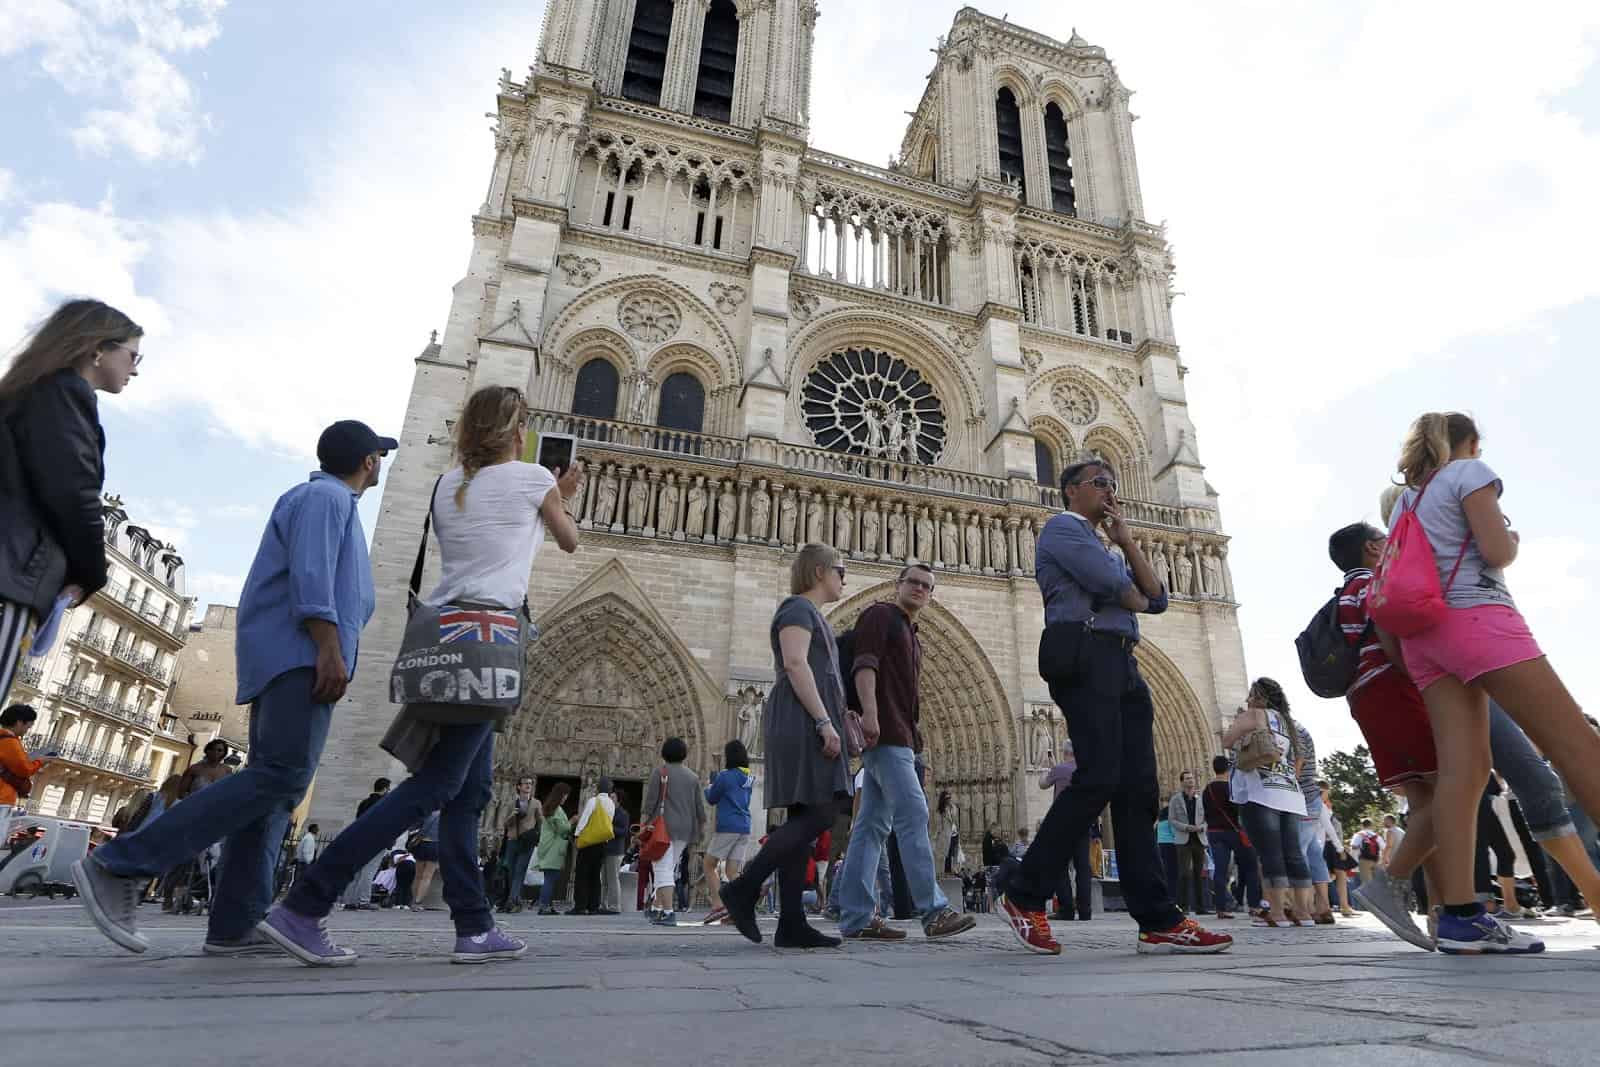 What Notre Dame Will Our Generation Build?